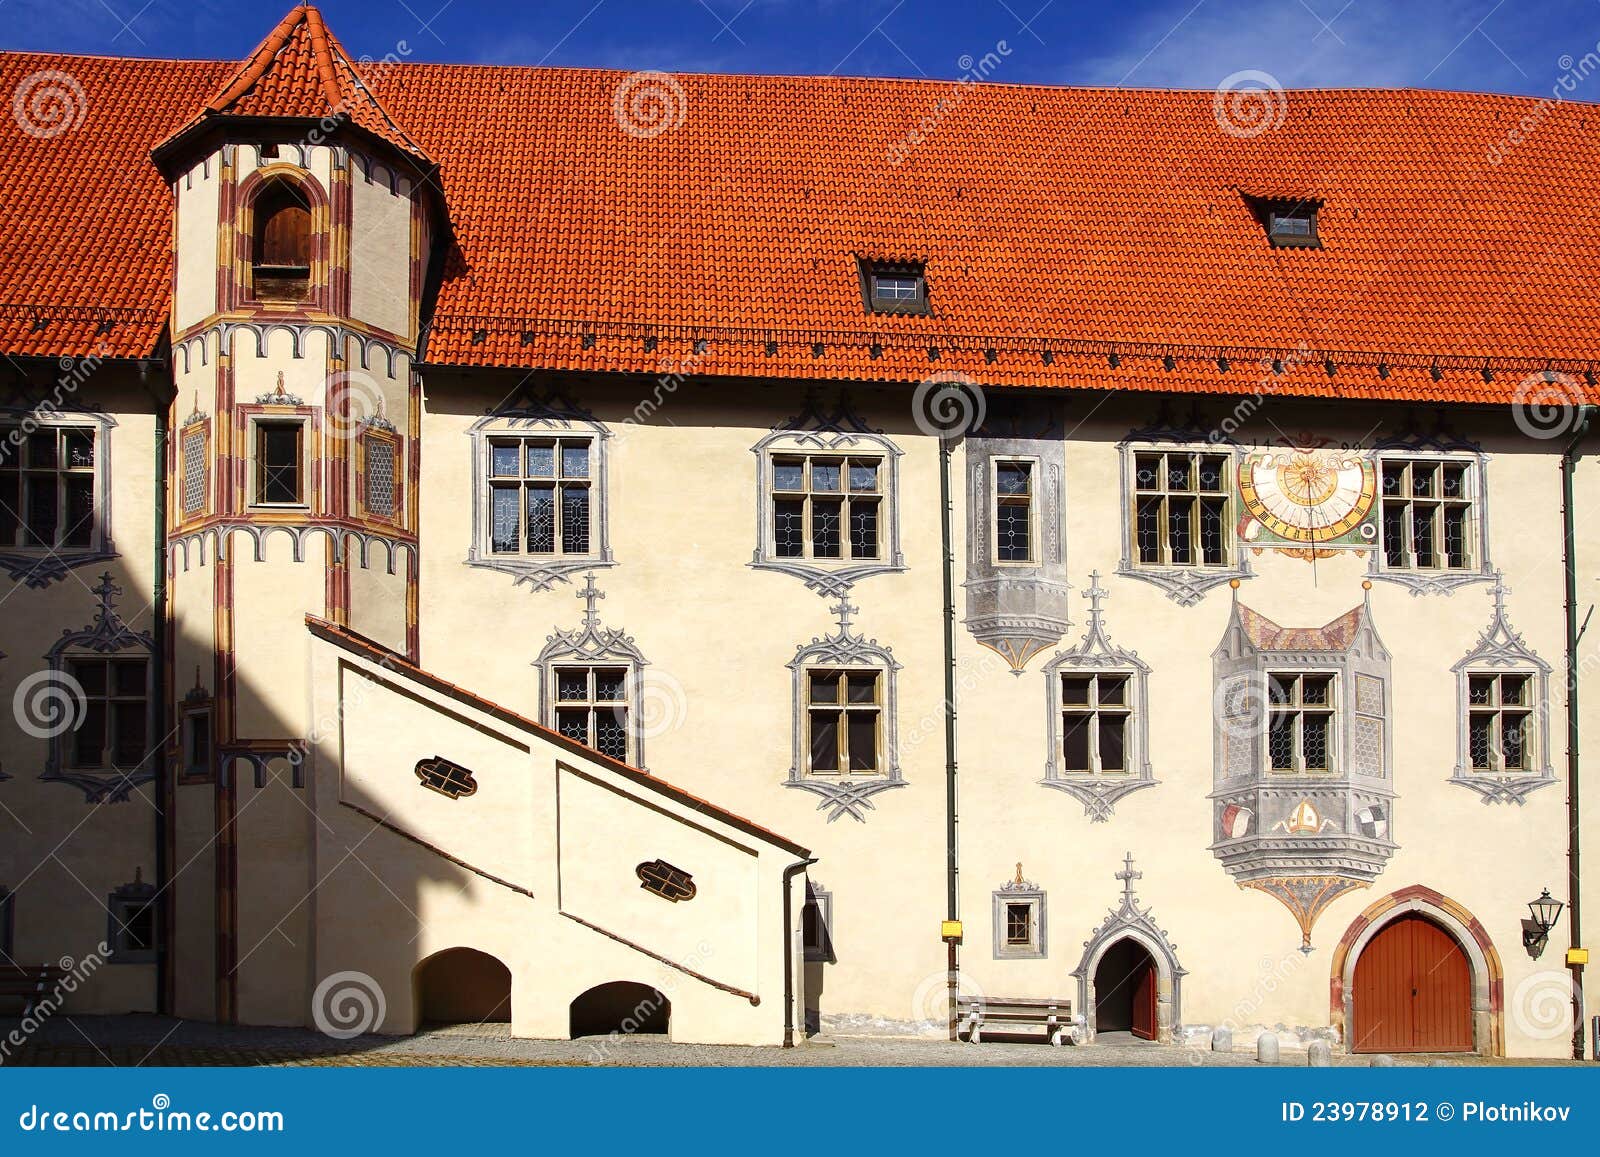 architecture of fussen. germany